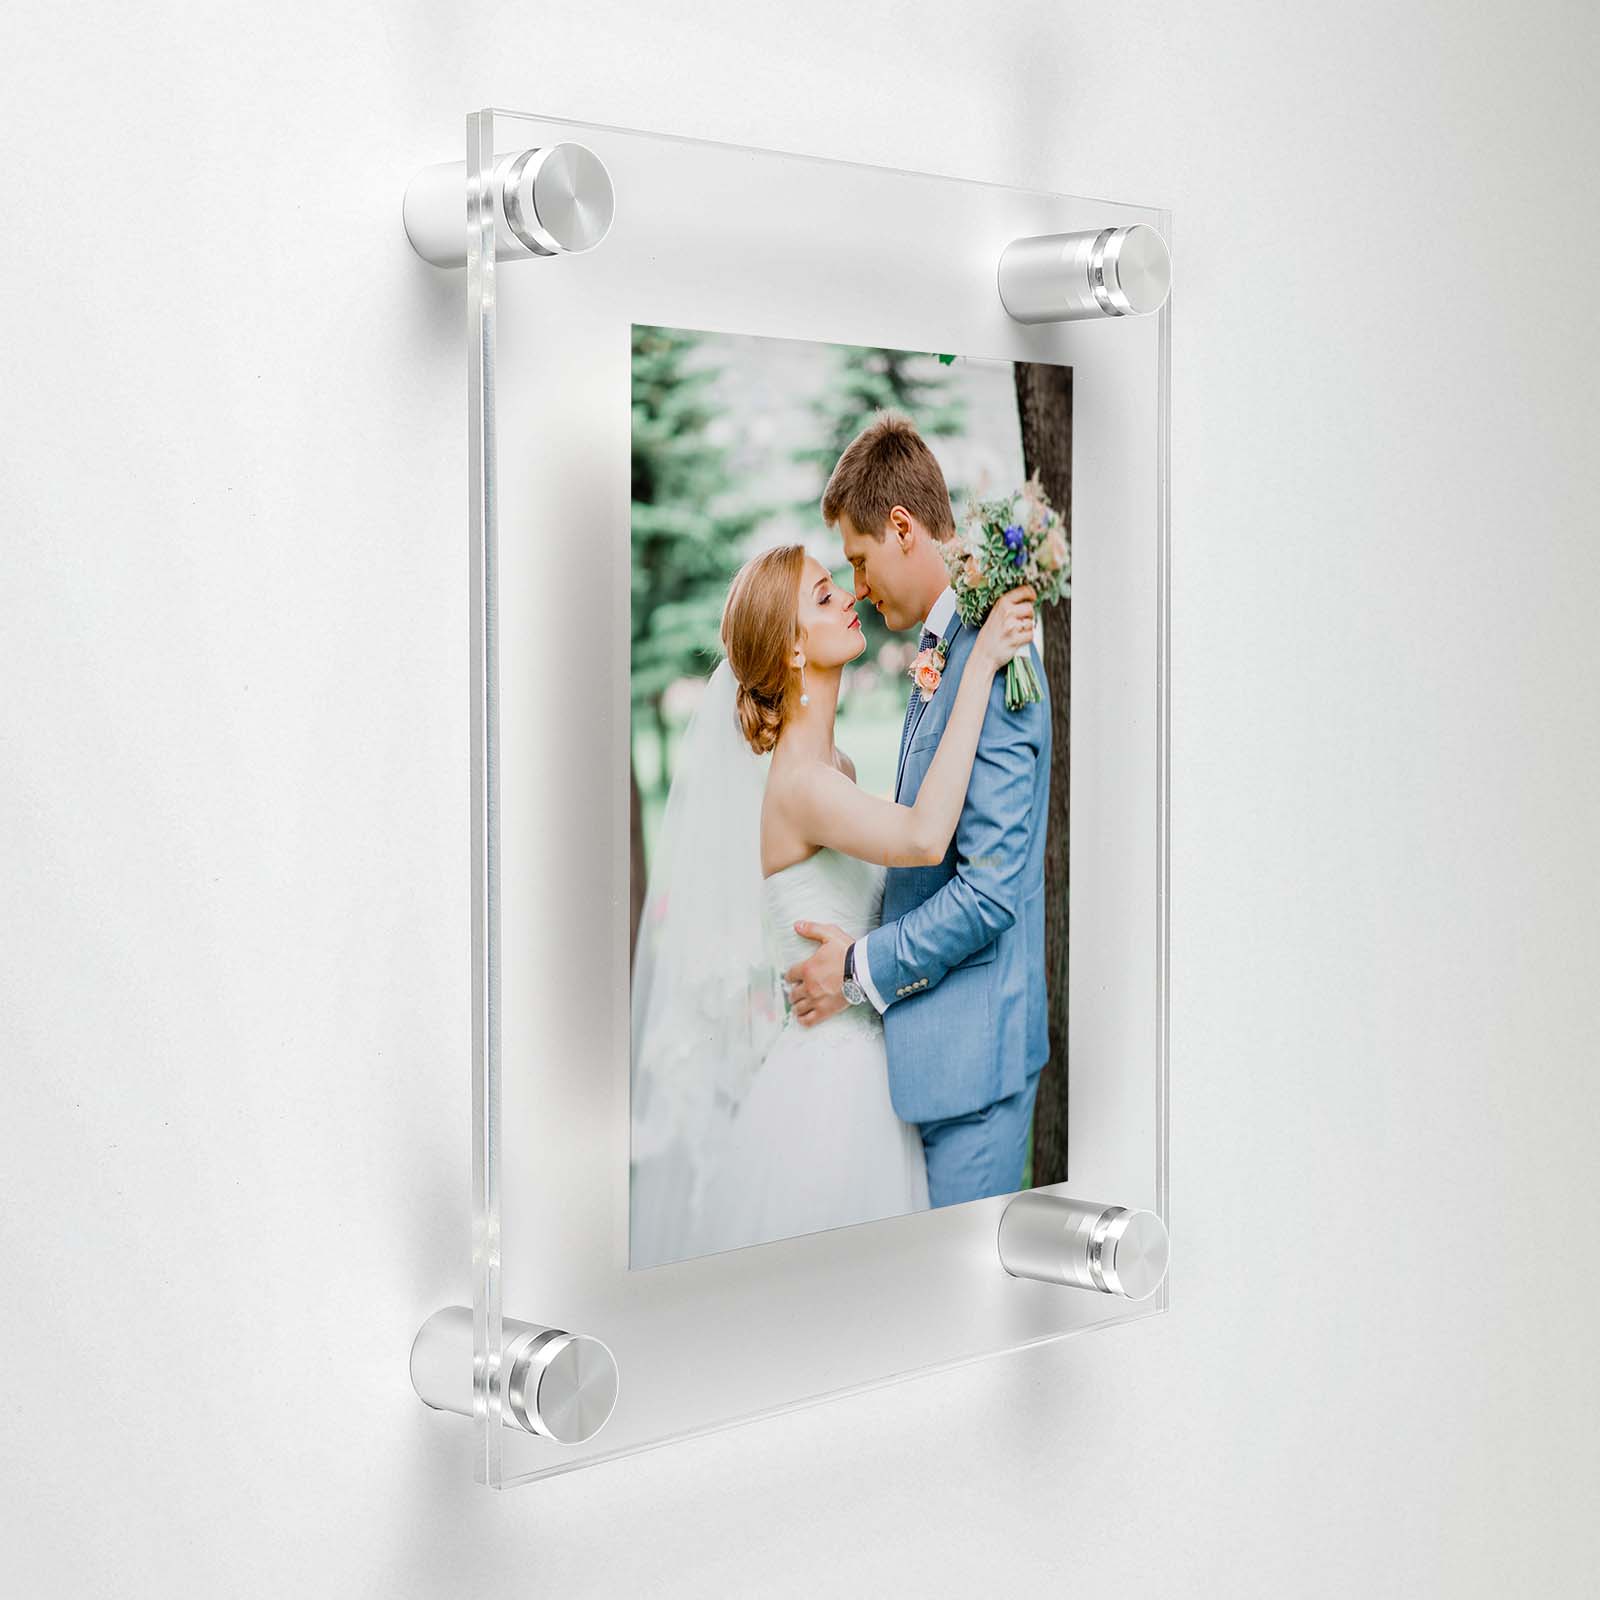 (2) 13-1/2'' x 19-1/2'' Clear Acrylics , Pre-Drilled With Polished Edges (Thick 3/16'' each), Wall Frame with (4) 5/8'' x 1'' Silver Anodized Aluminum Standoffs includes Screws and Anchors